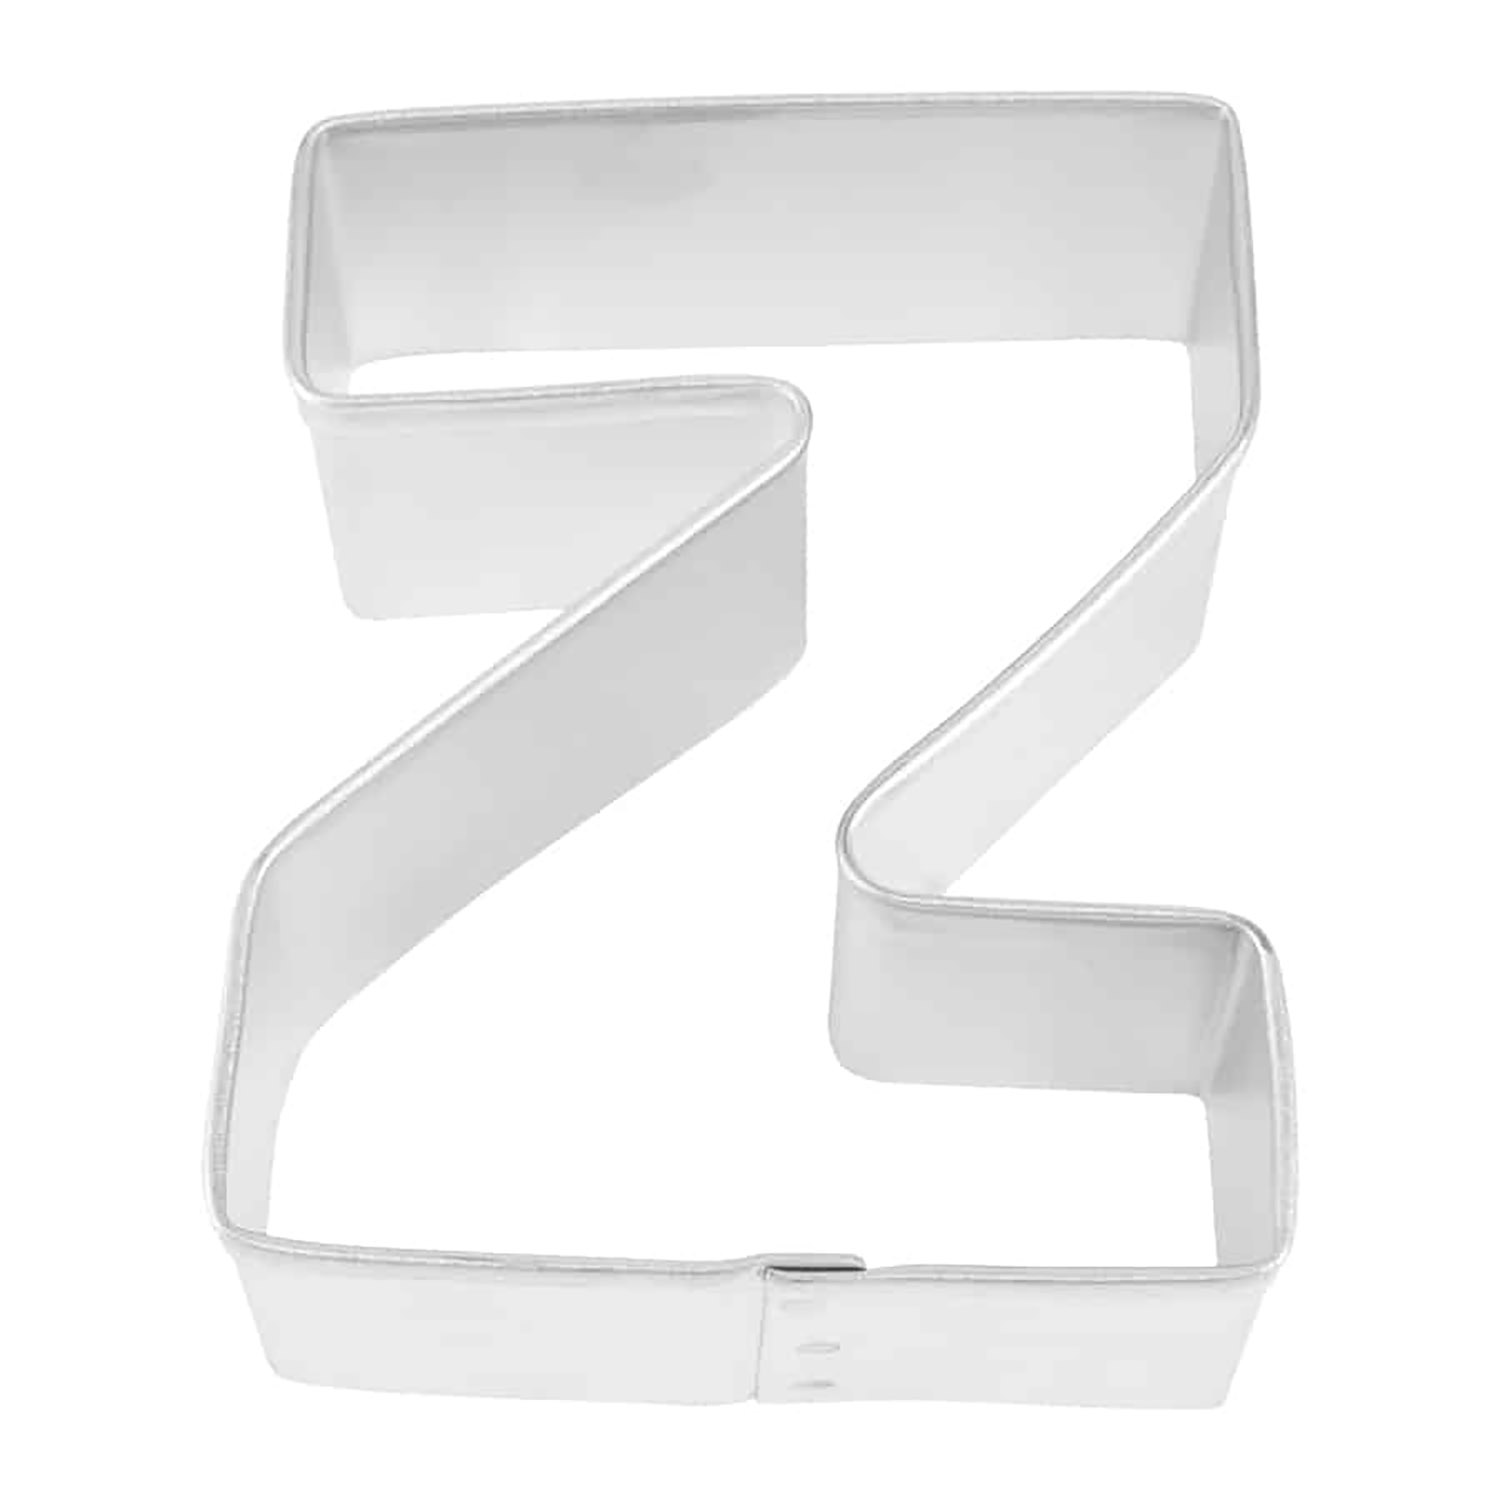 Letter Z Cookie Cutter